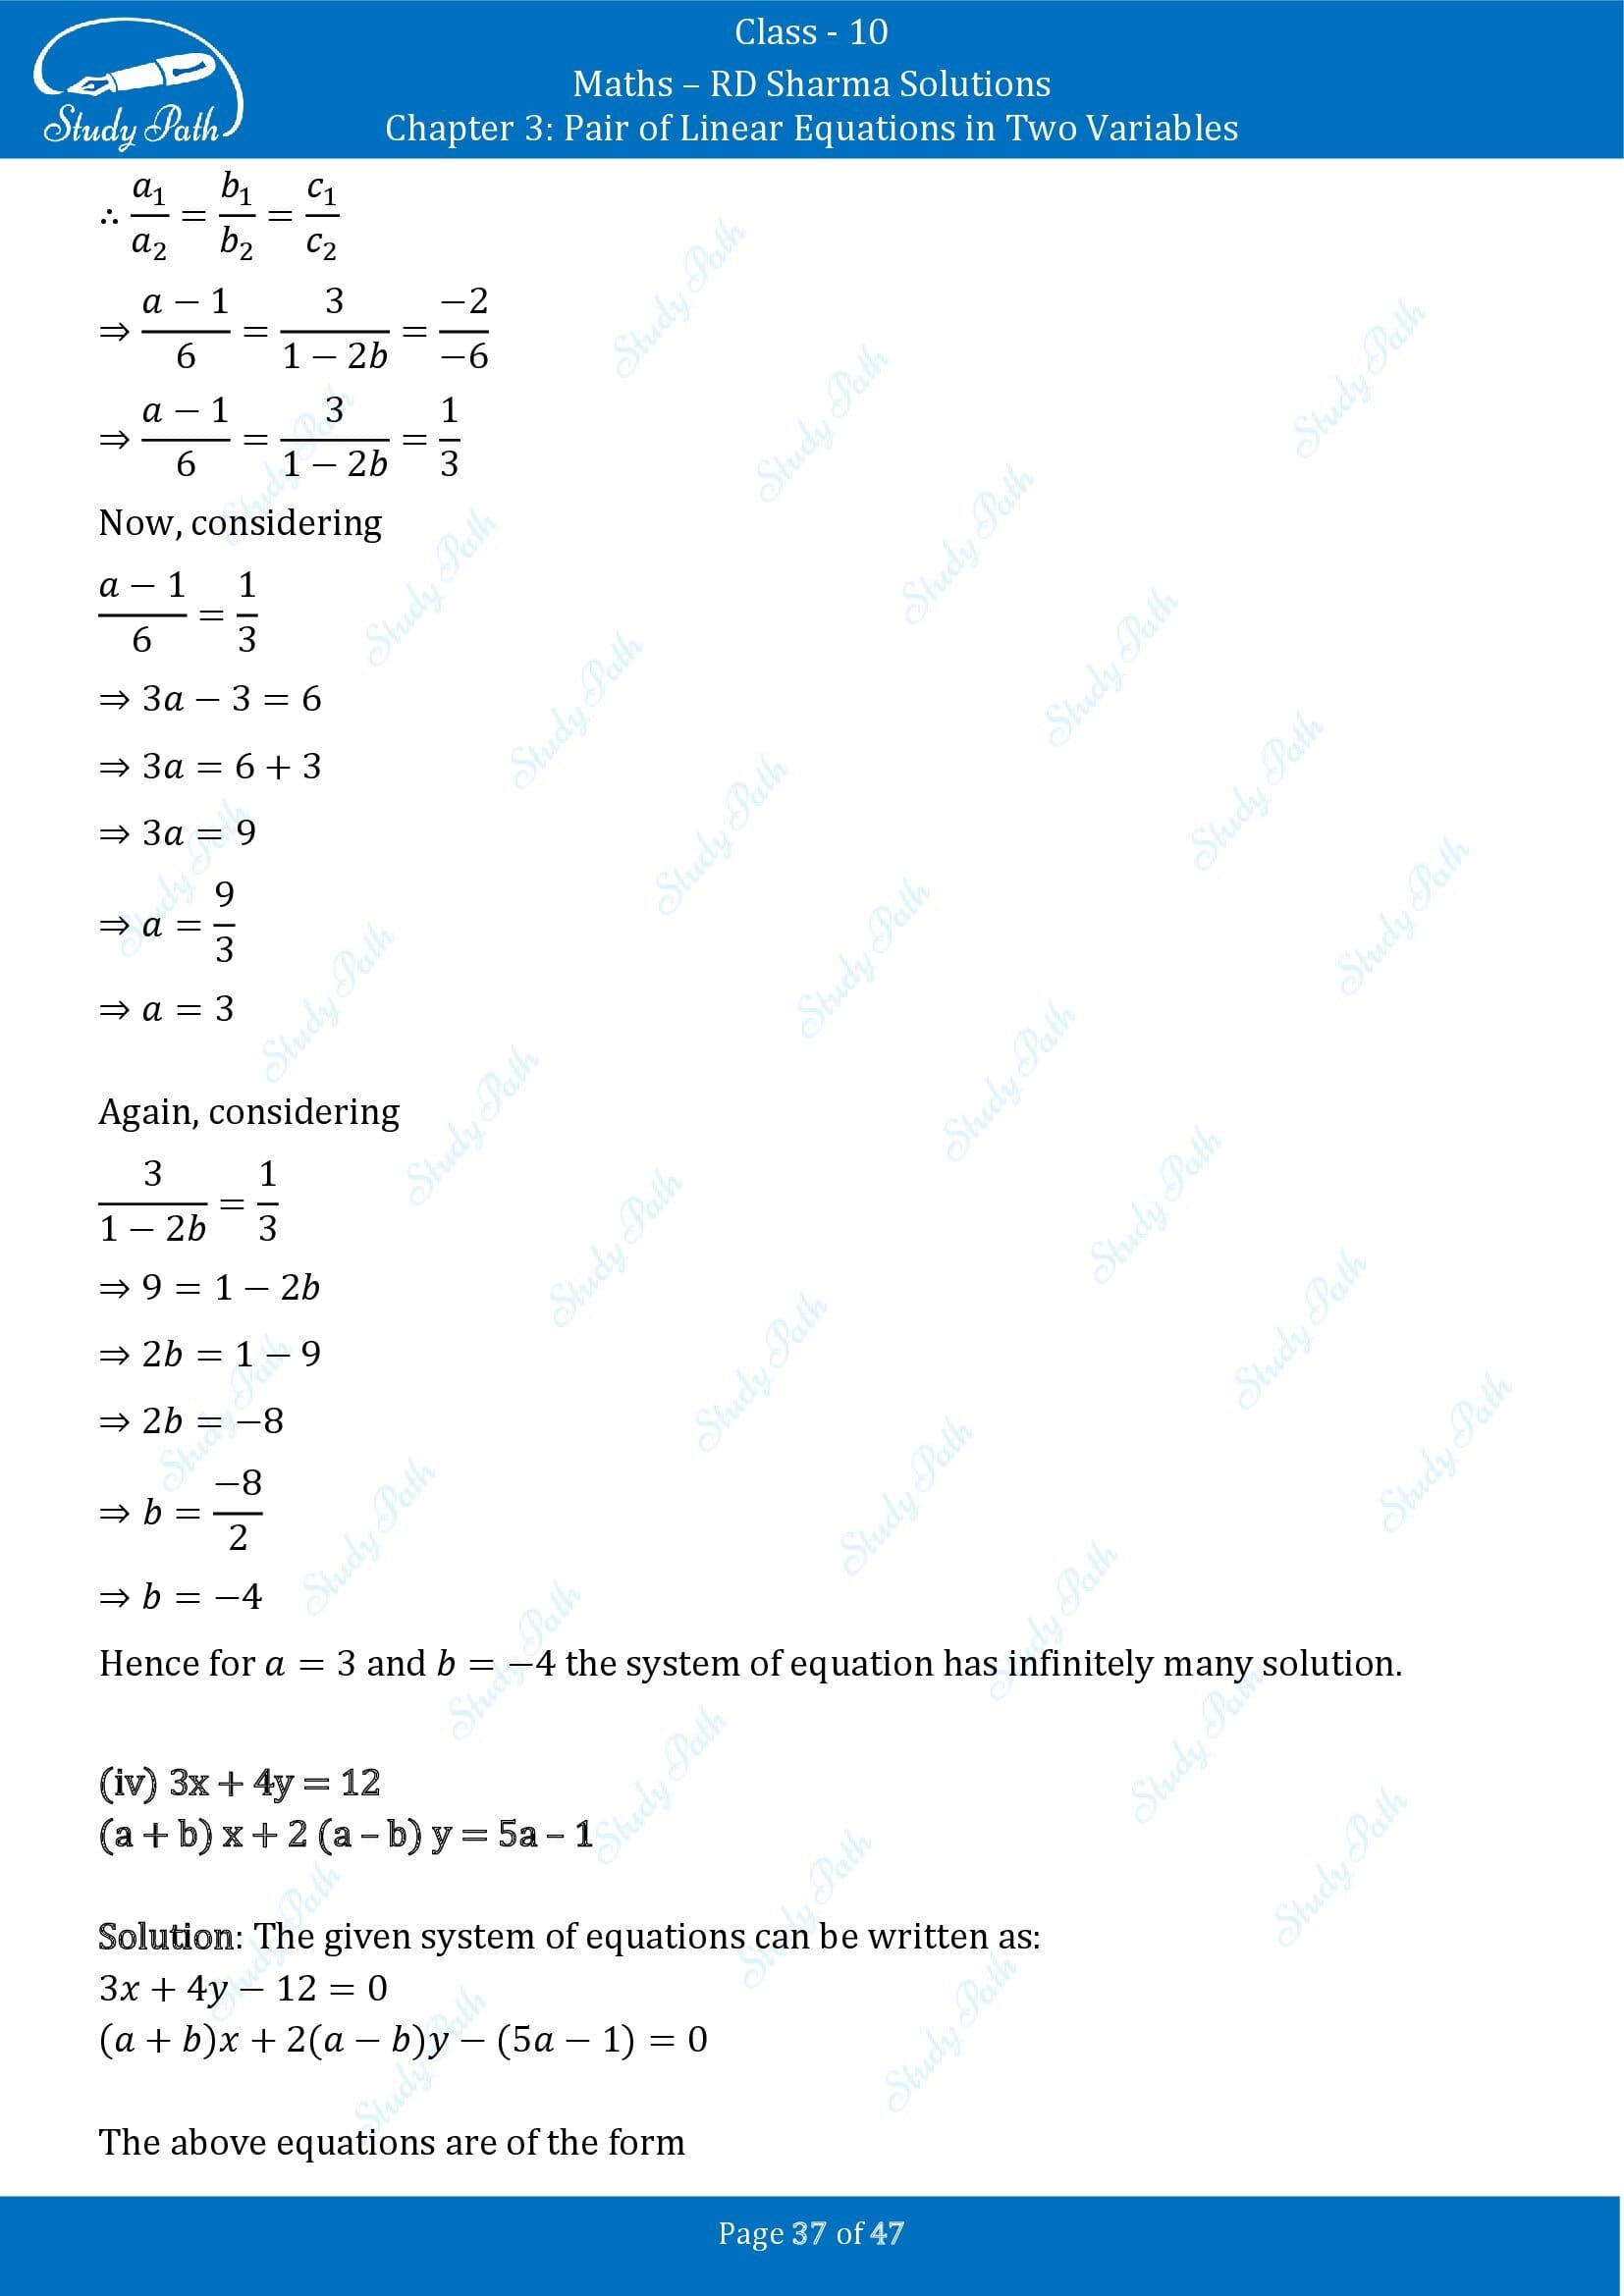 RD Sharma Solutions Class 10 Chapter 3 Pair of Linear Equations in Two Variables Exercise 3.5 00037